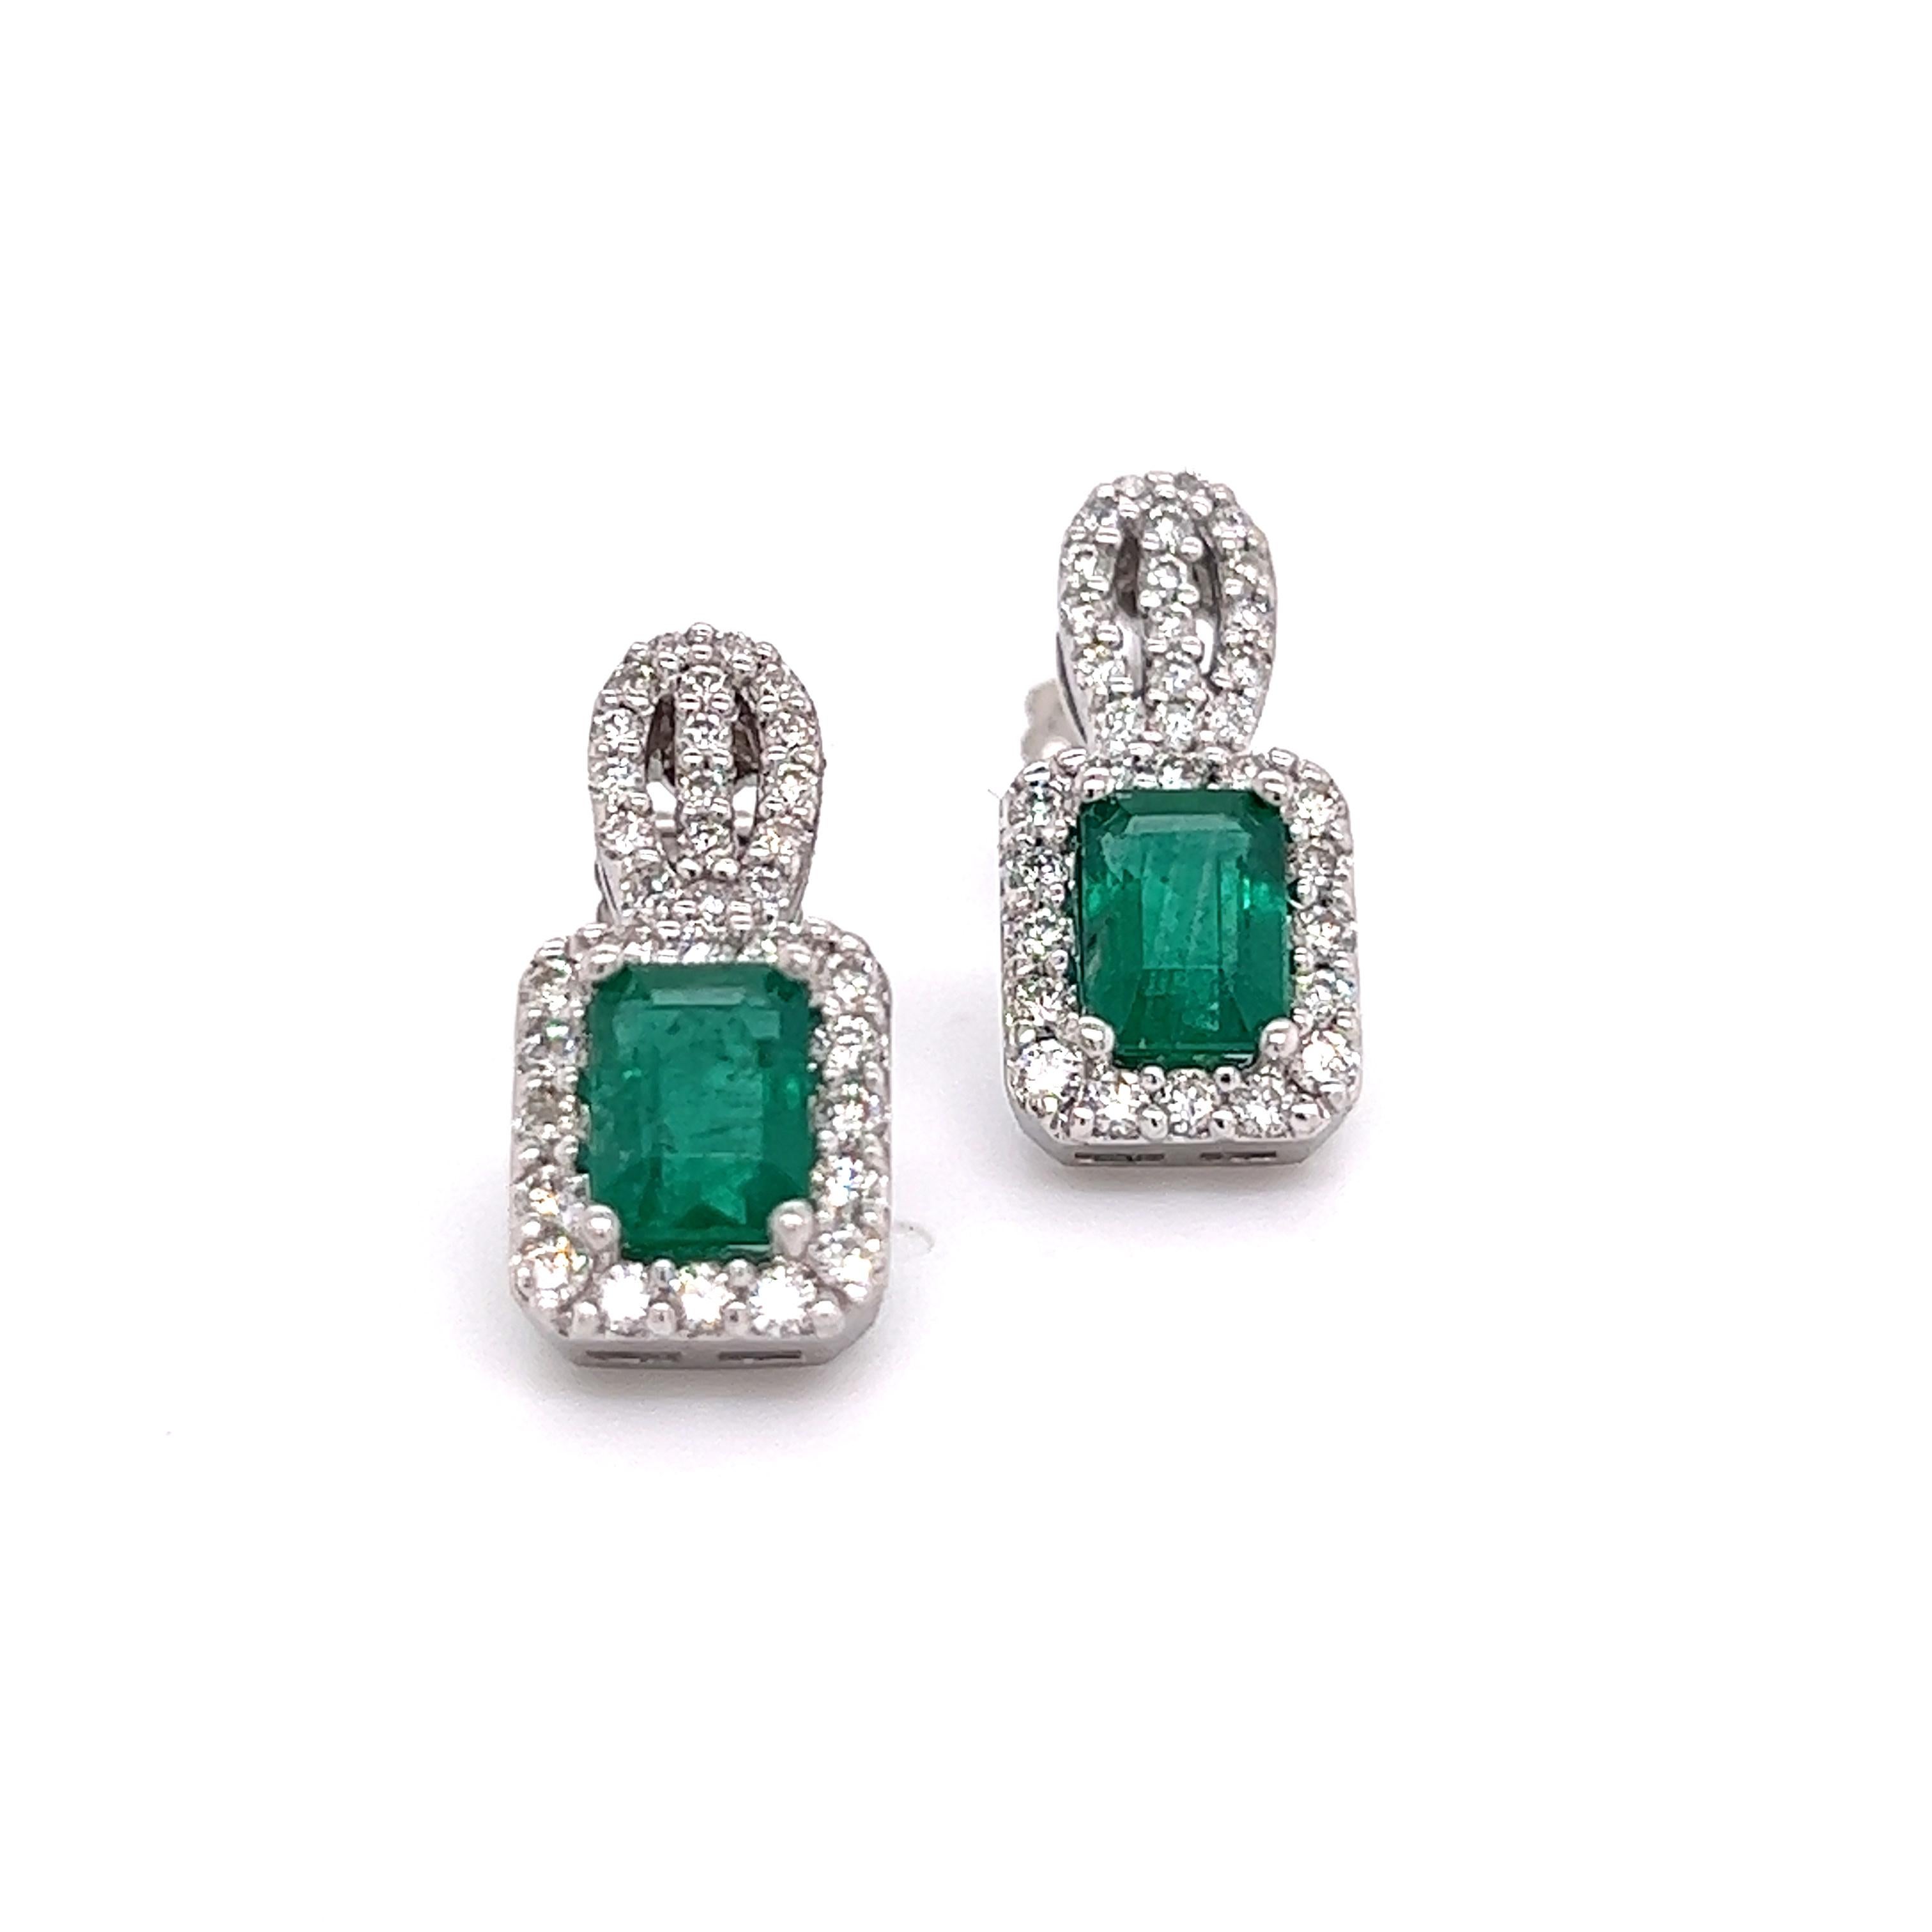 Natural Emerald Diamond Stud Earrings 14k Gold 2.74 TCW Certified For Sale 6